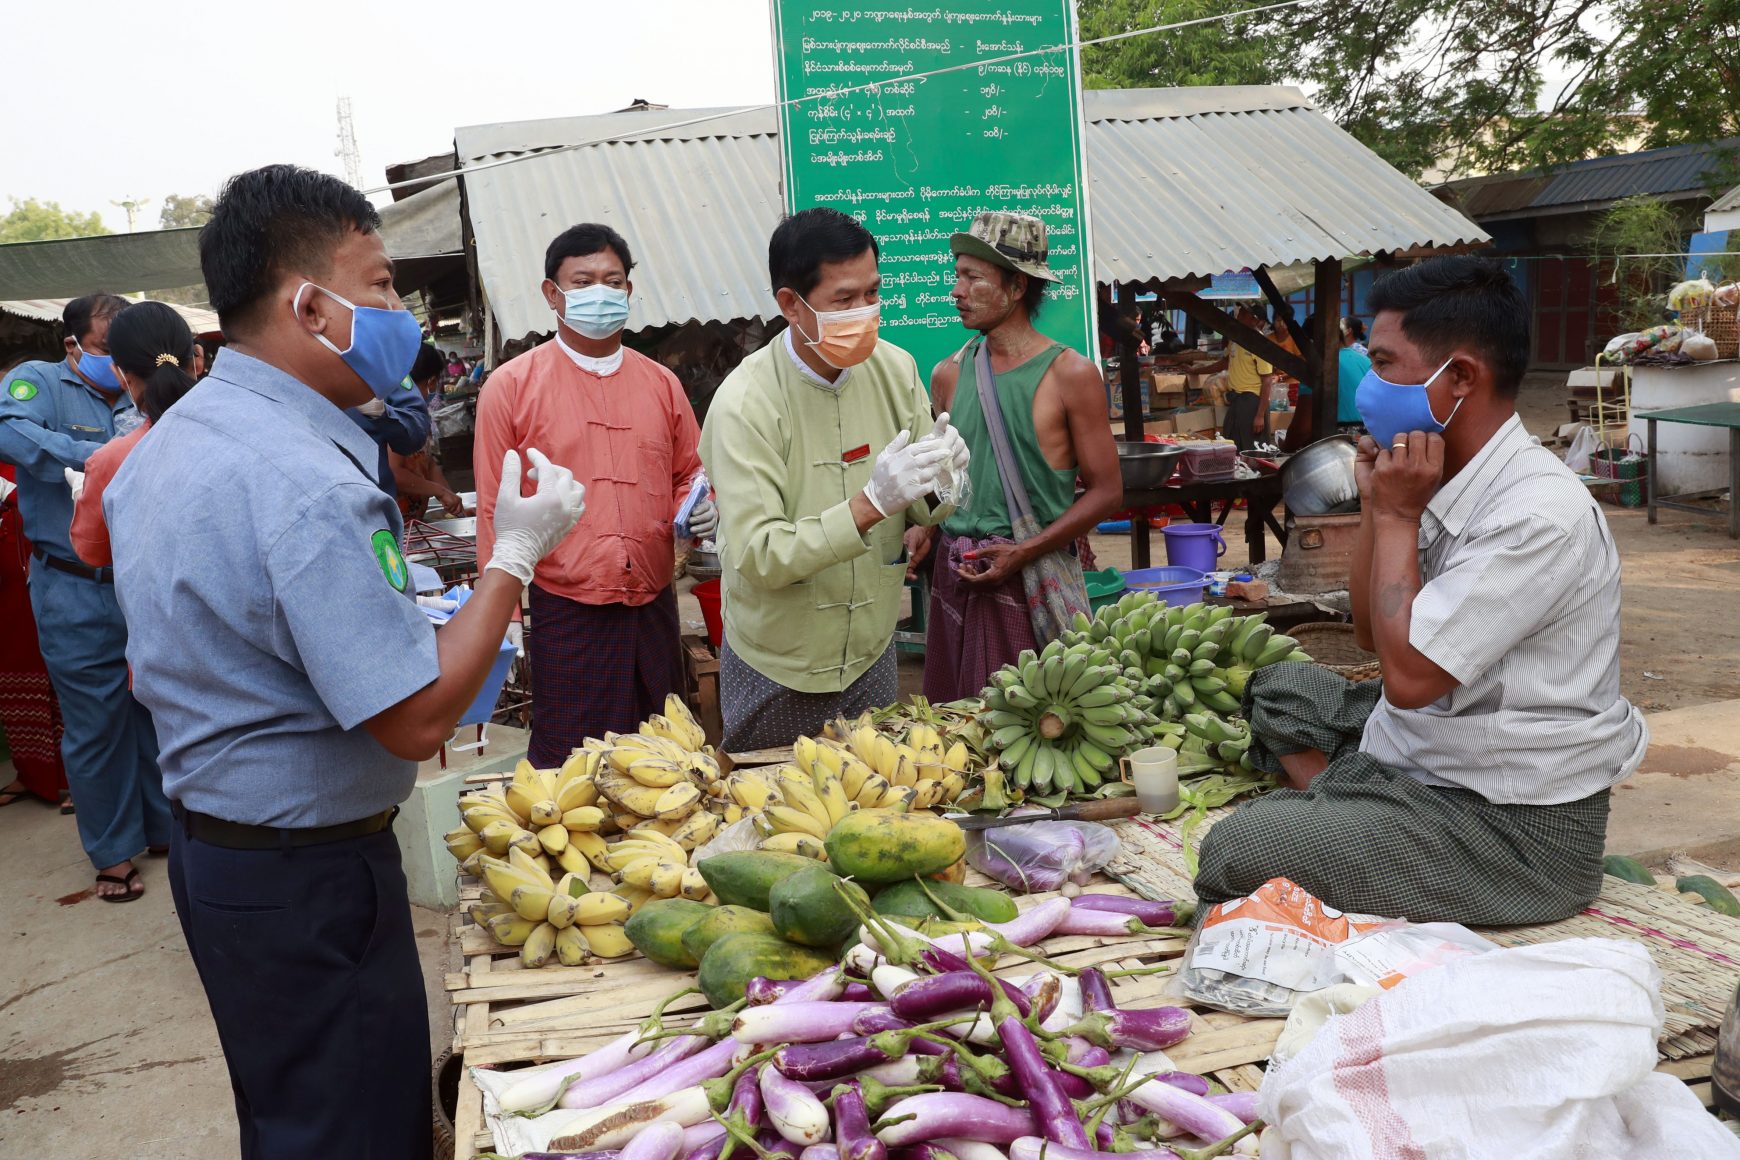 Government officials distribute face masks to vendors in Myanmar